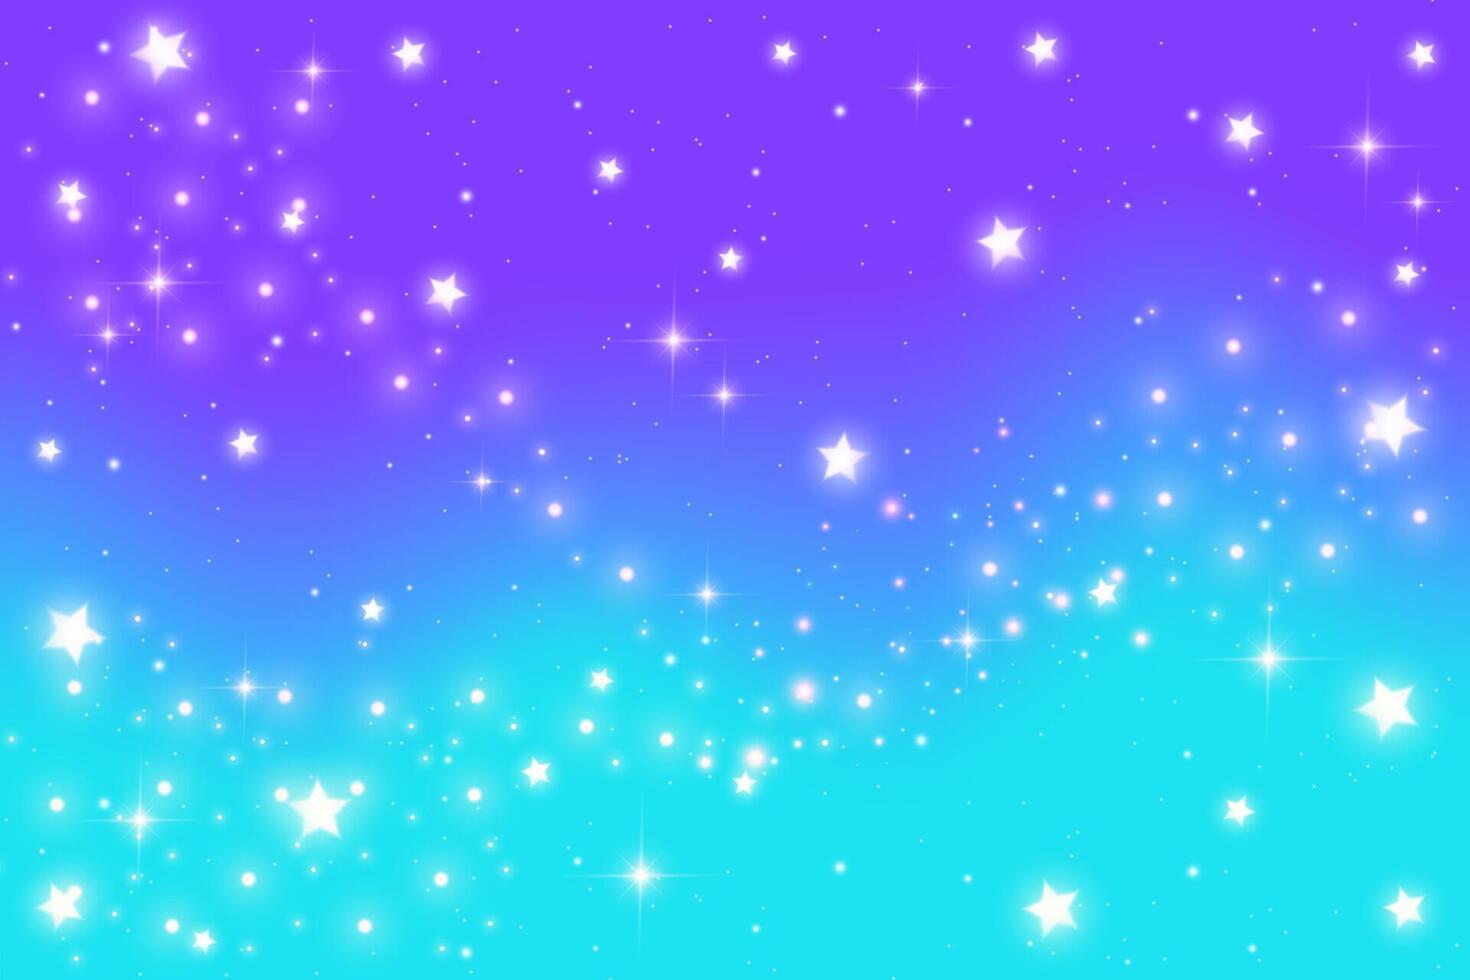 Blue night sky. Starry space background with constellation. Bright aurora on winter cosmic landscape. Fantasy polar borealis. Gradient with sparkles. vector